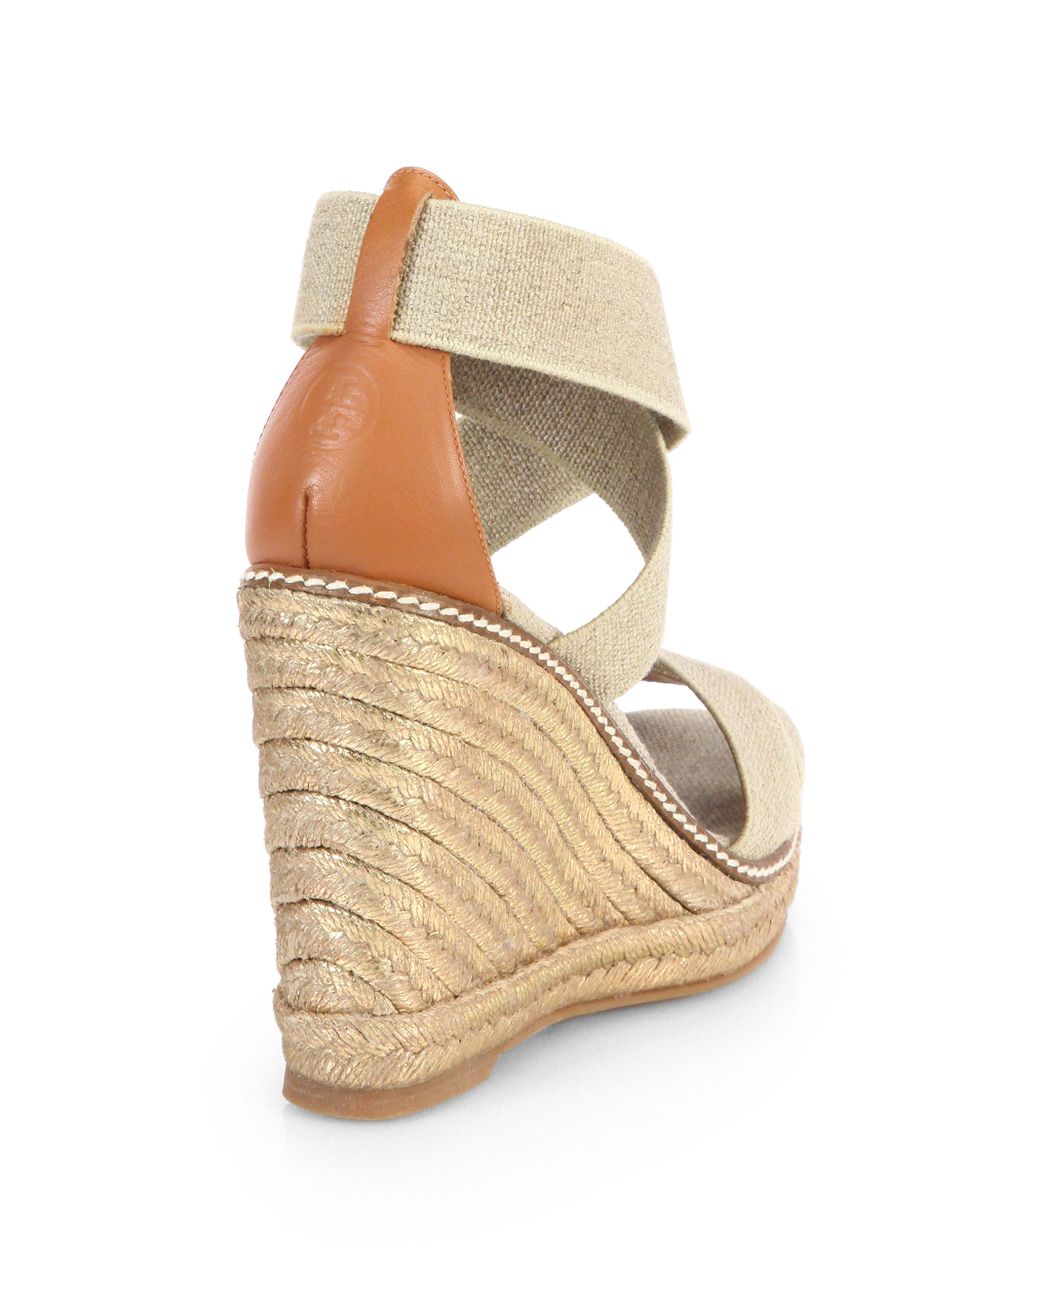 Tory Burch Adonis Crisscross Espadrille Wedge Sandals in Natural | Lyst